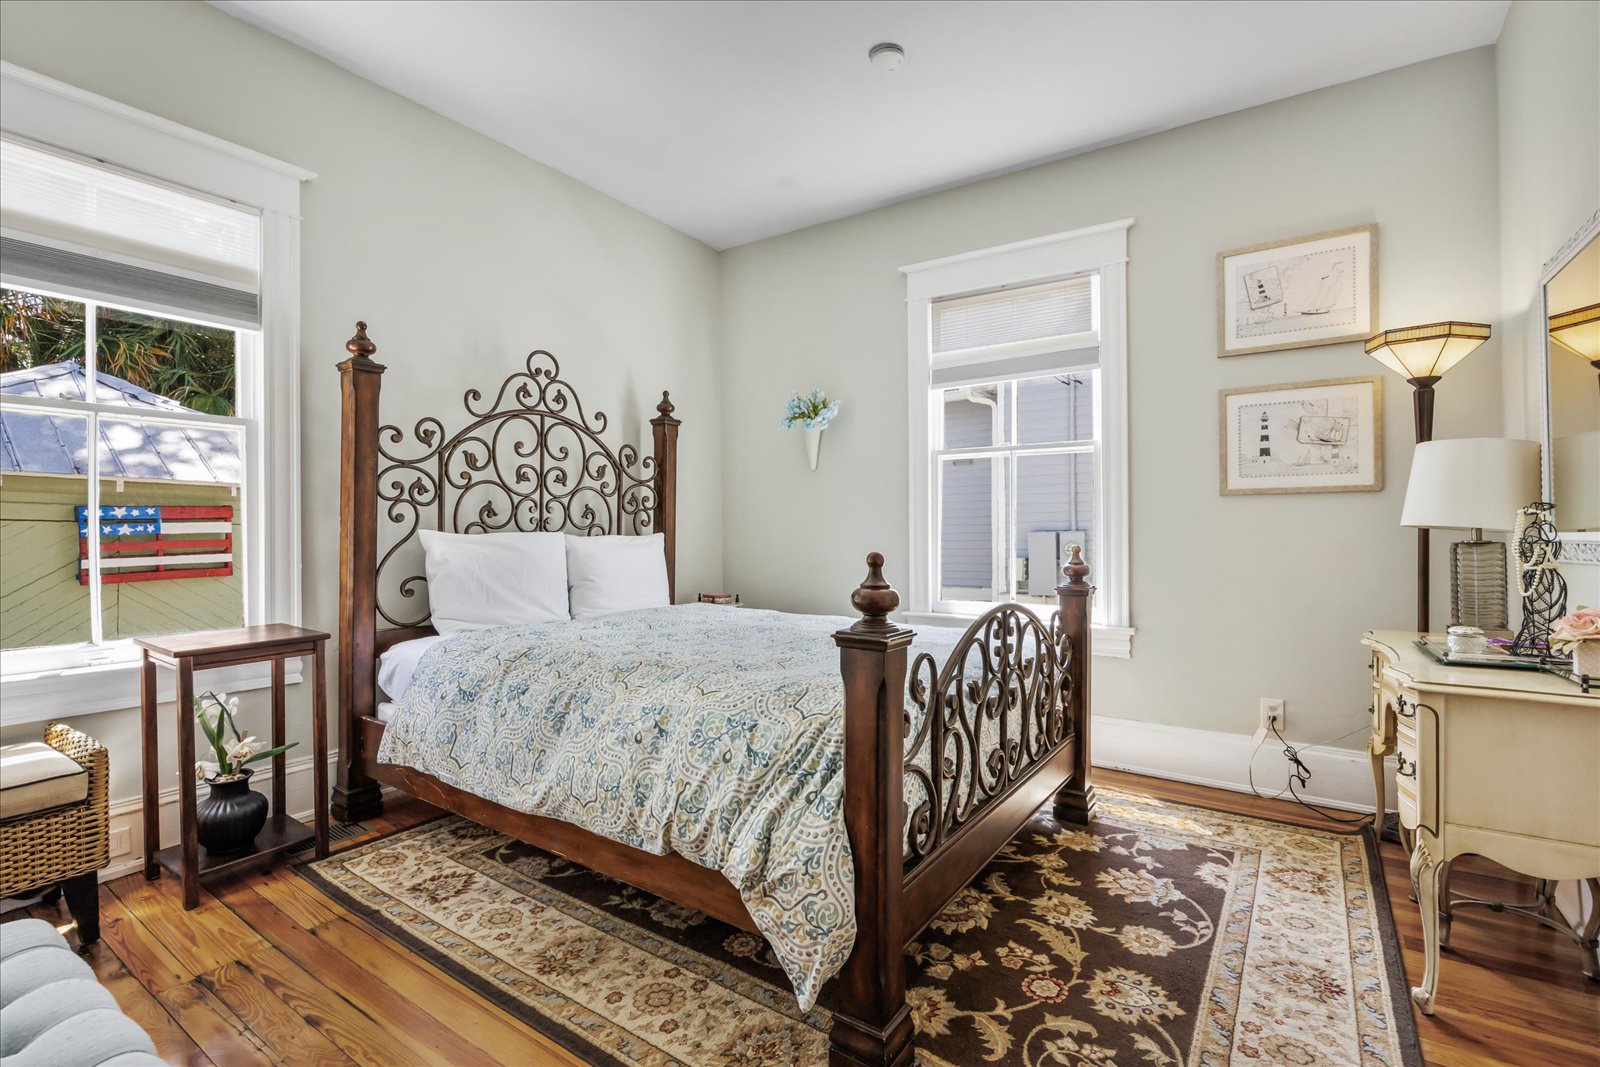 The master bedroom offers a regal queen bed & large windows